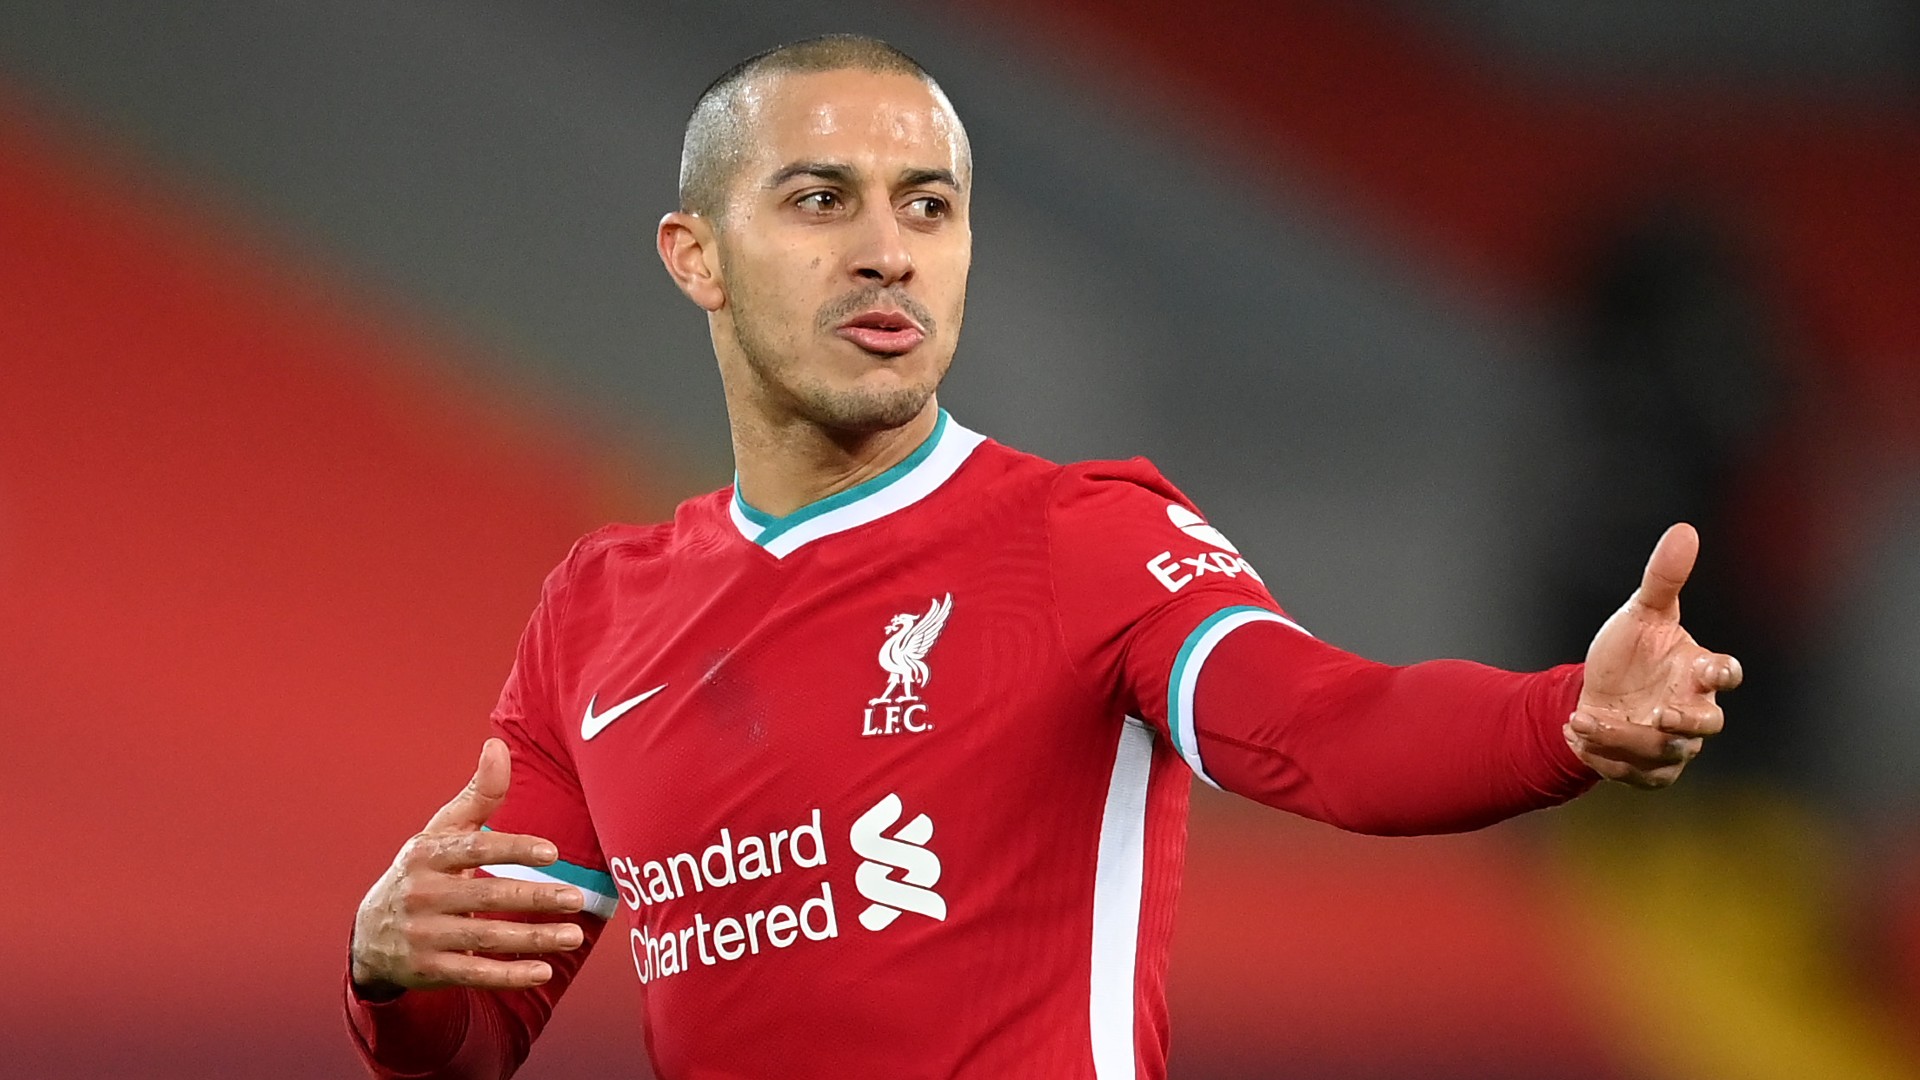 ‘Thiago criticism very harsh as Liverpool aren’t clicking’ – Too early to assess midfielder, says Aldridge